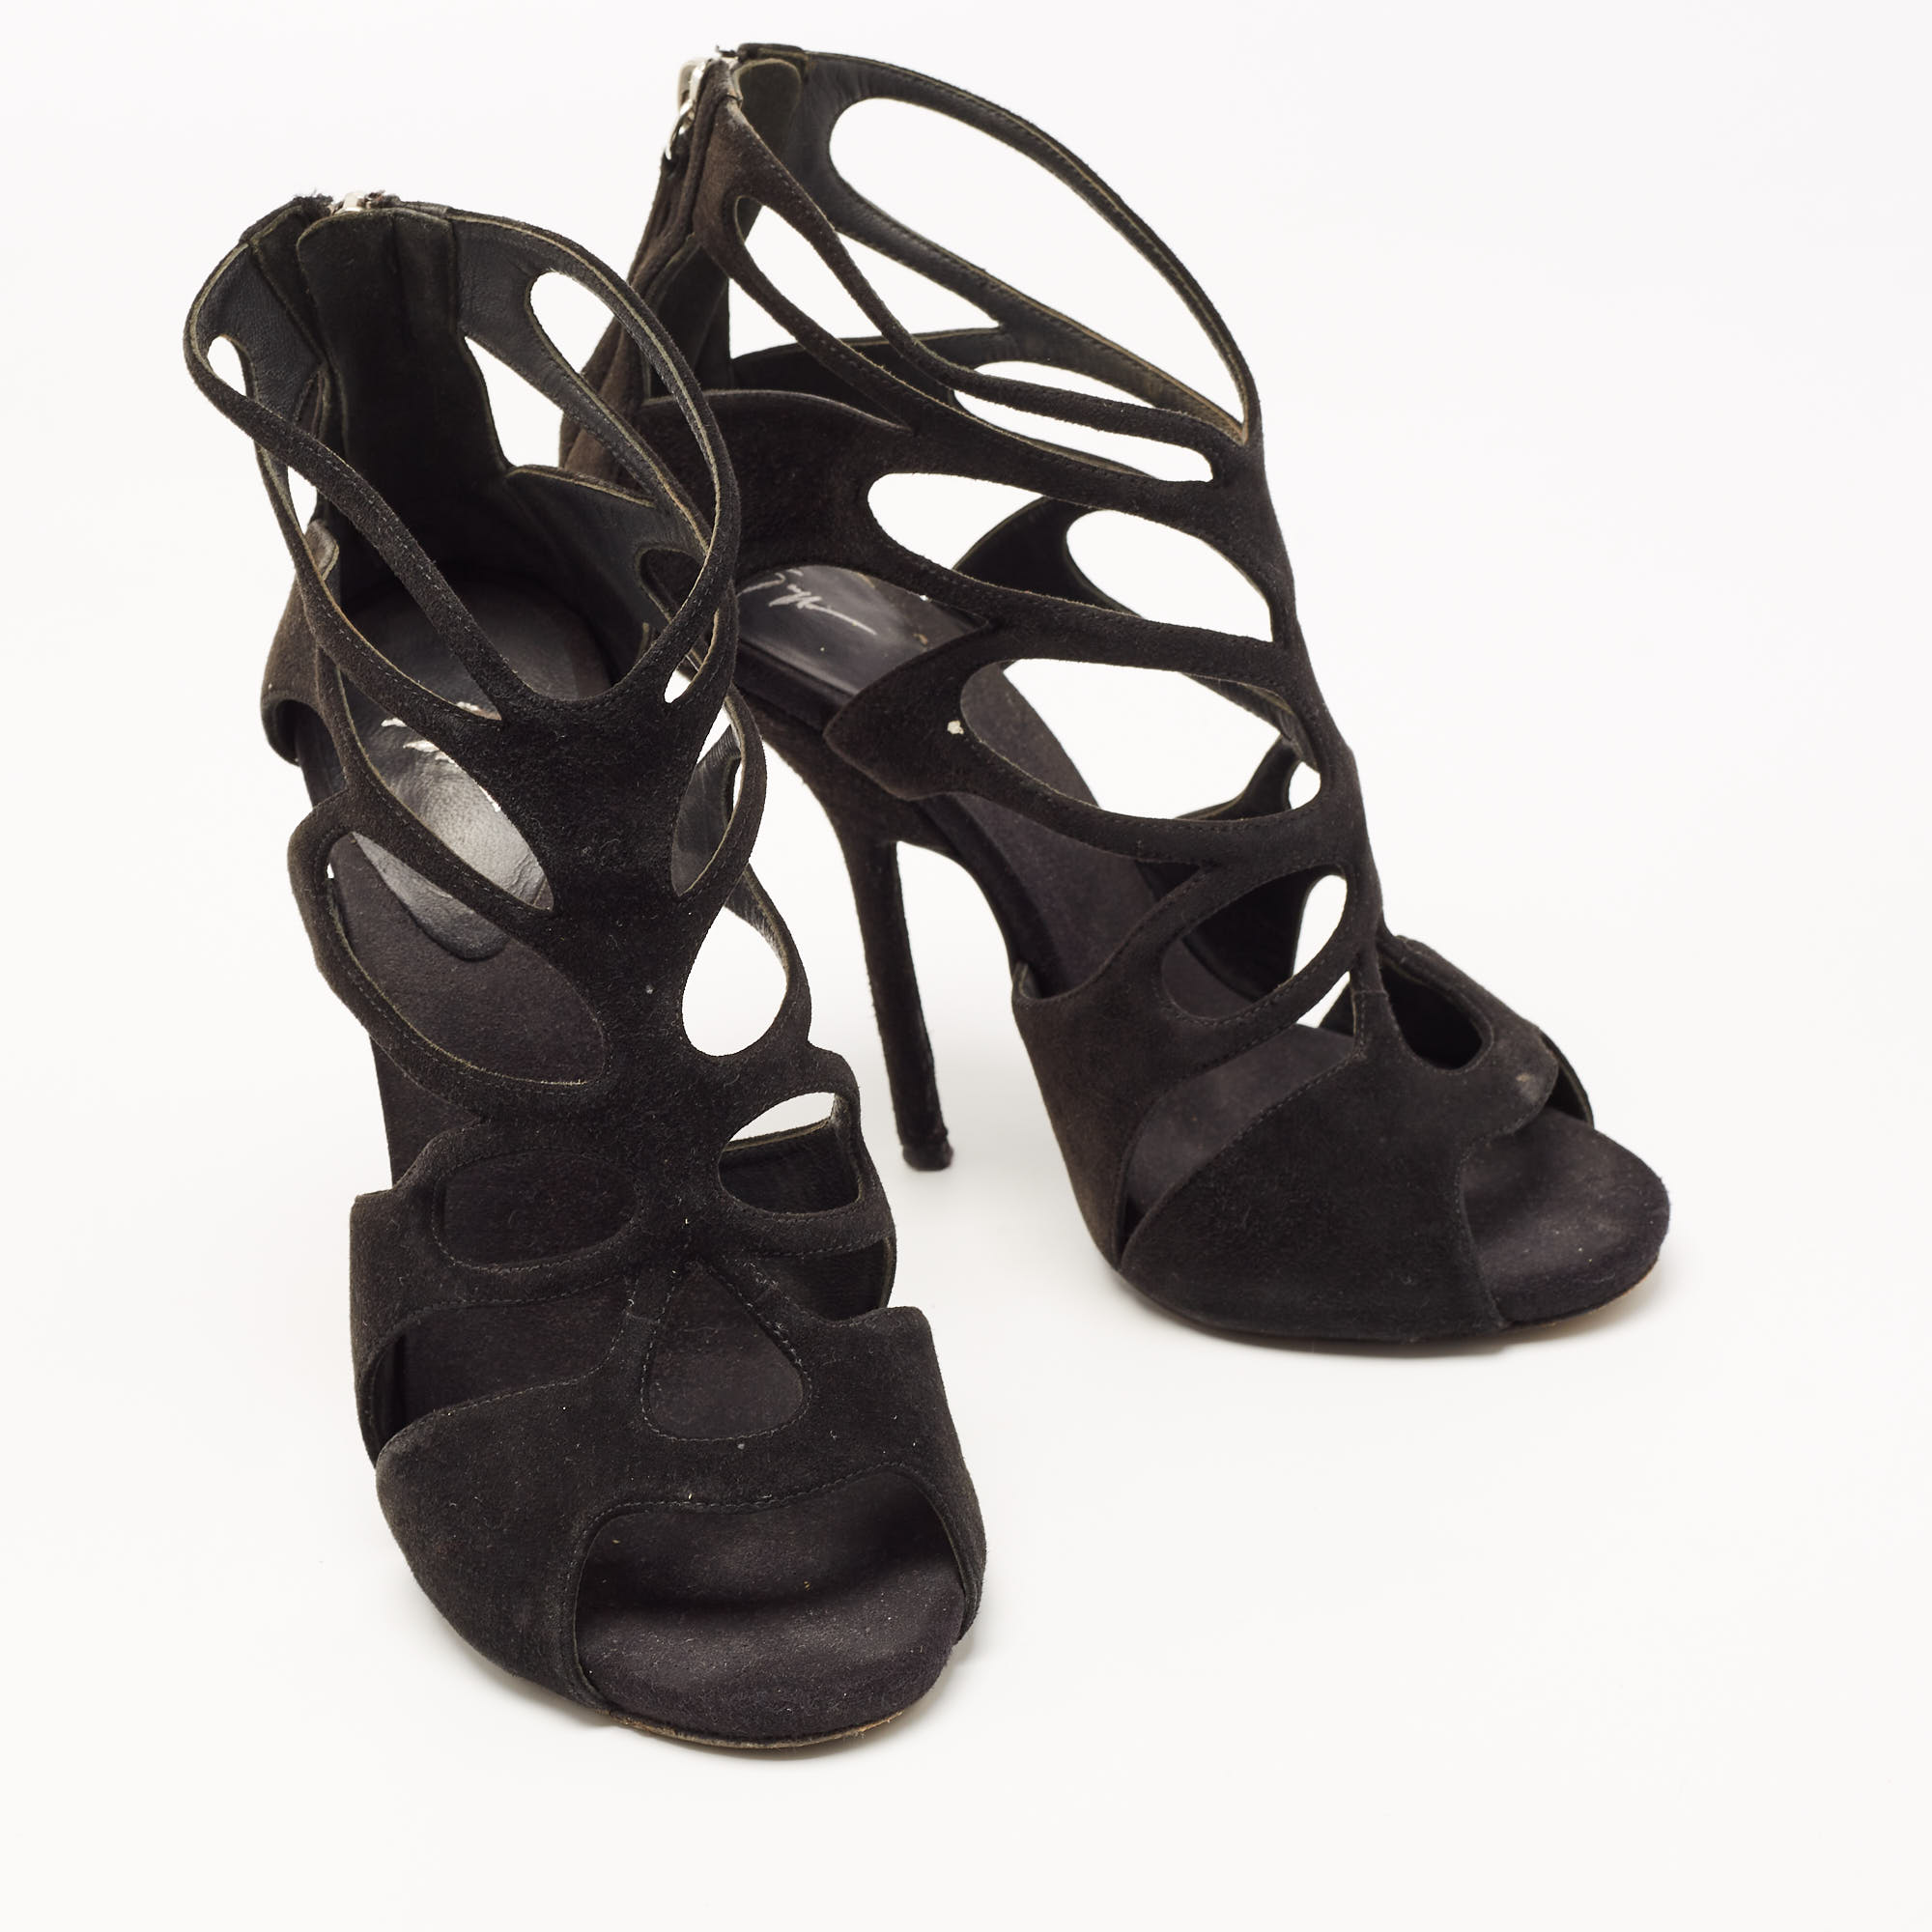 Giuseppe Zanotti Black Suede Cut Out Ankle Strap Sandals Size 37